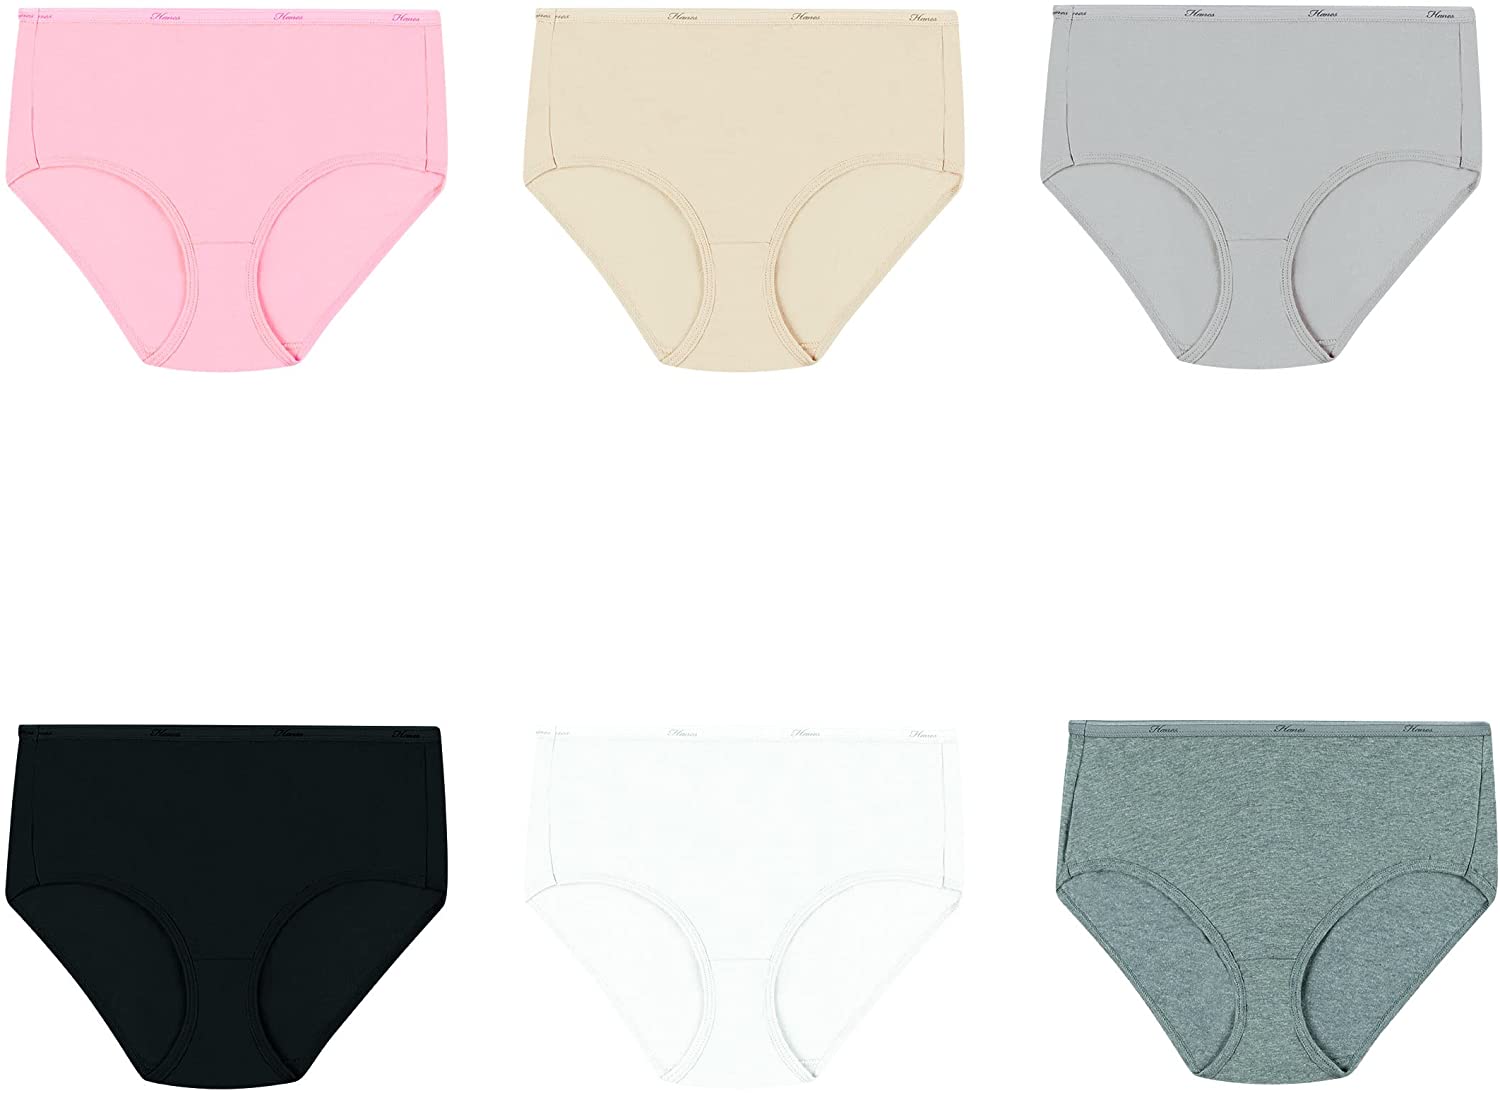 Hanes Sporty Women's Hipster Panties 6-Pack 